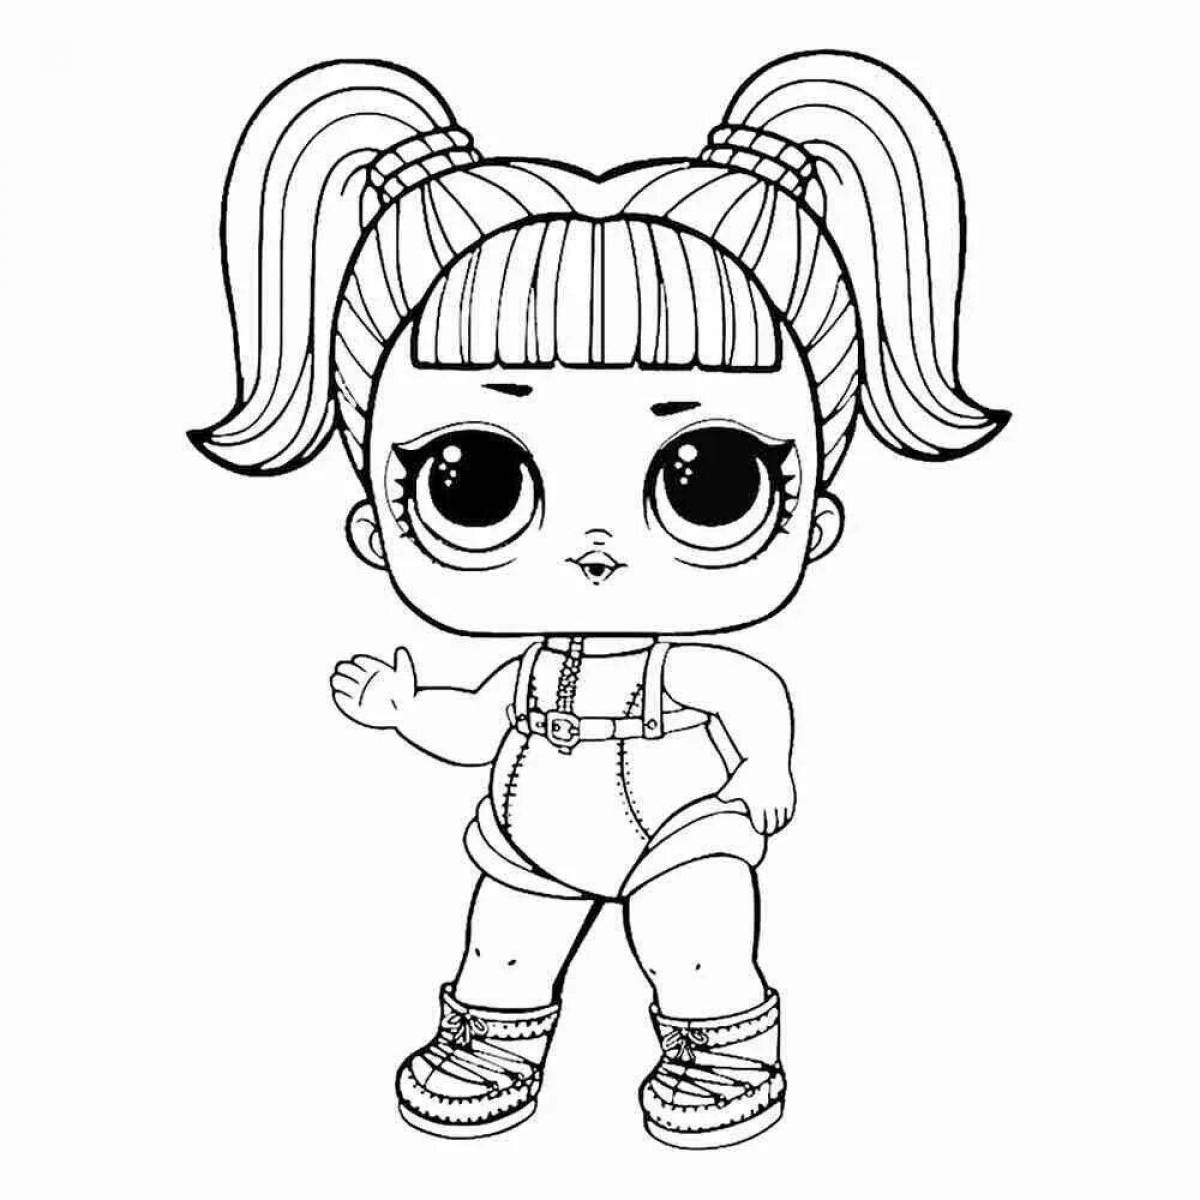 Amazing lola doll coloring book for kids